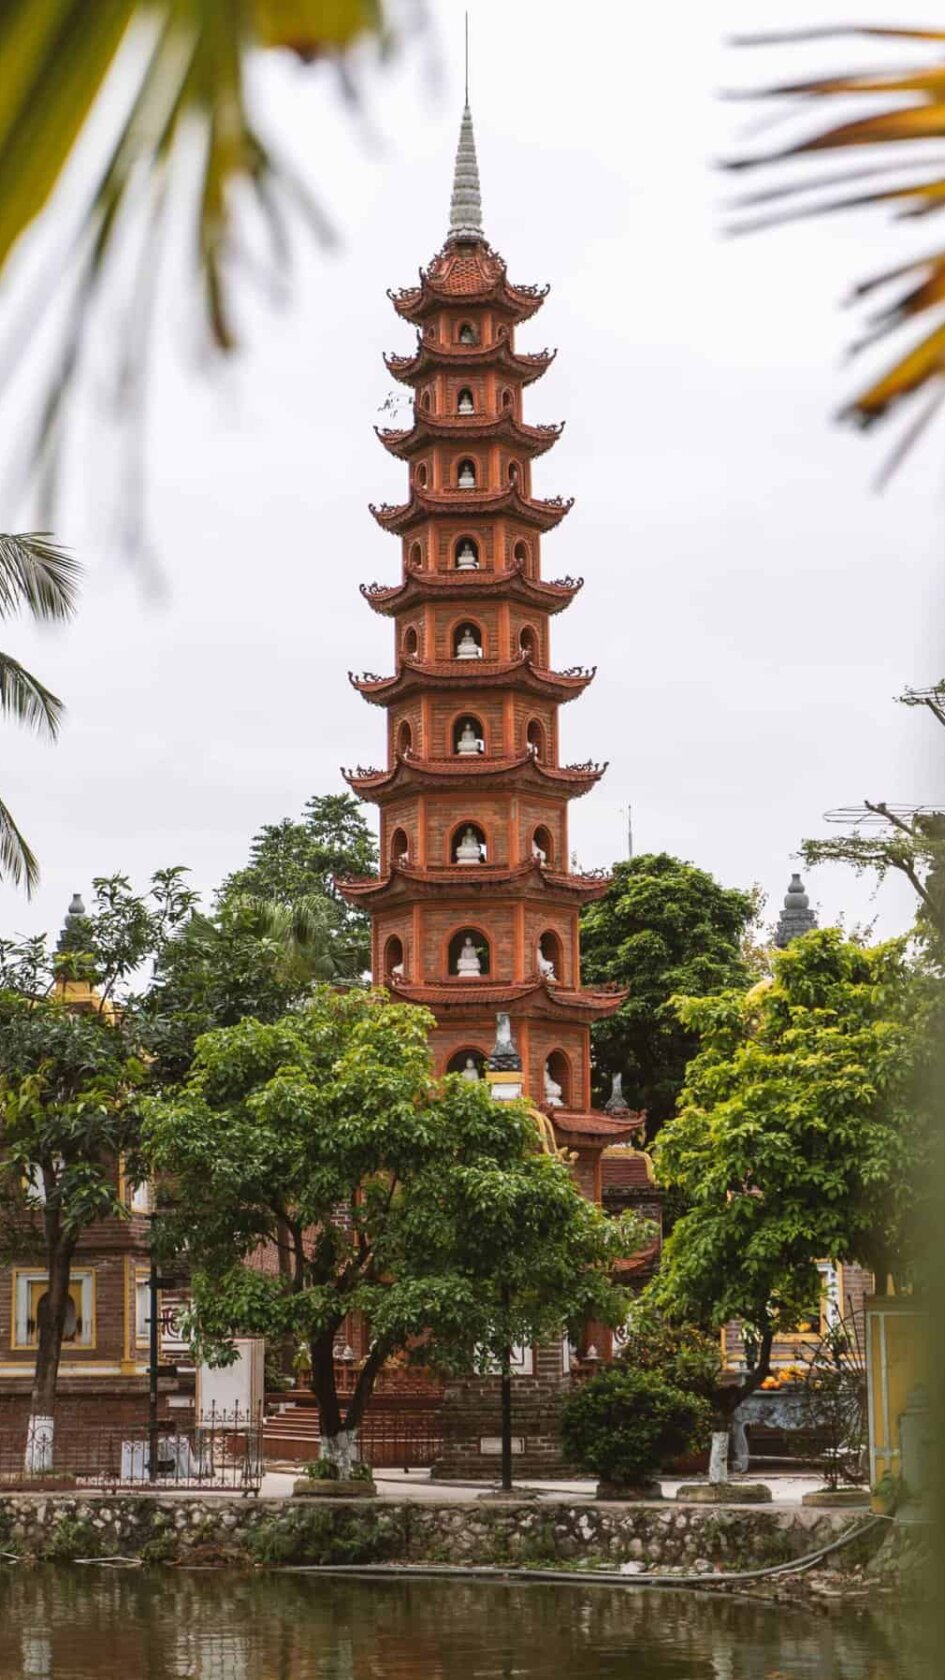 A beautiful Vietnamese temple in the capital of Hanoi